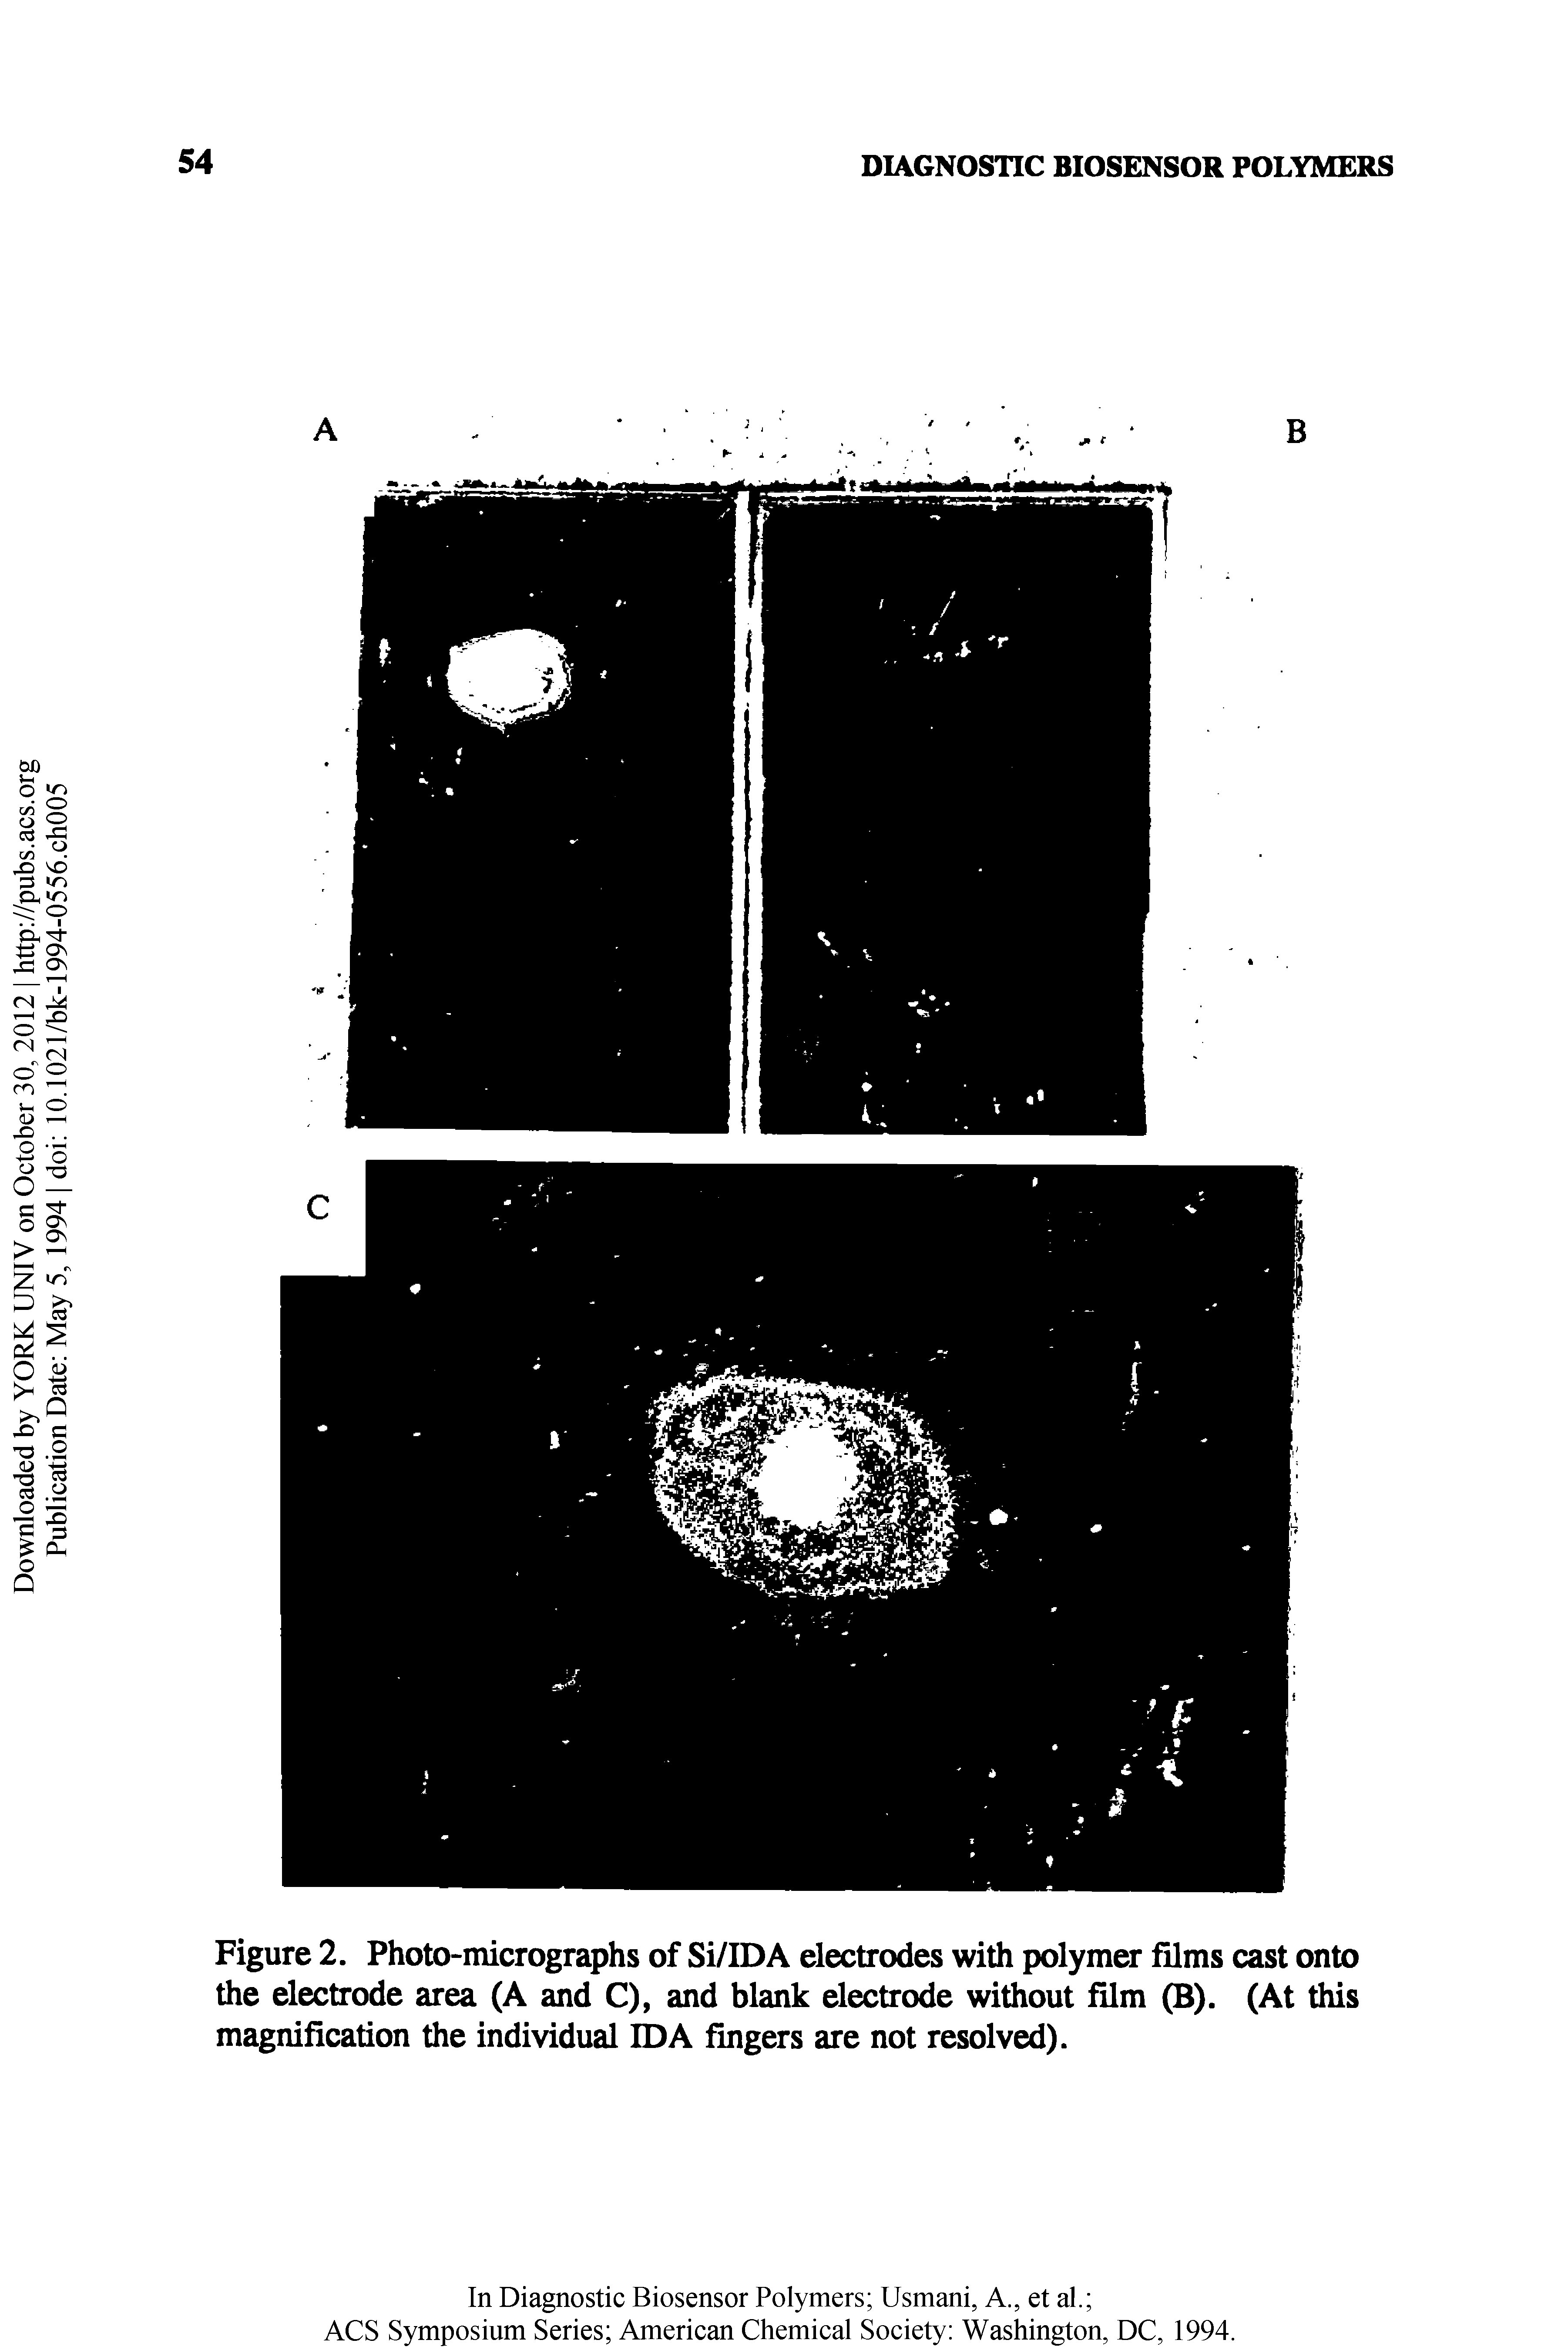 Figure 2. Photo-micrographs of Si/IDA electrodes with polymer films cast onto the electrode area (A and C), and blank electrode without film (B). (At this magnification the individual IDA fingers are not resolved).